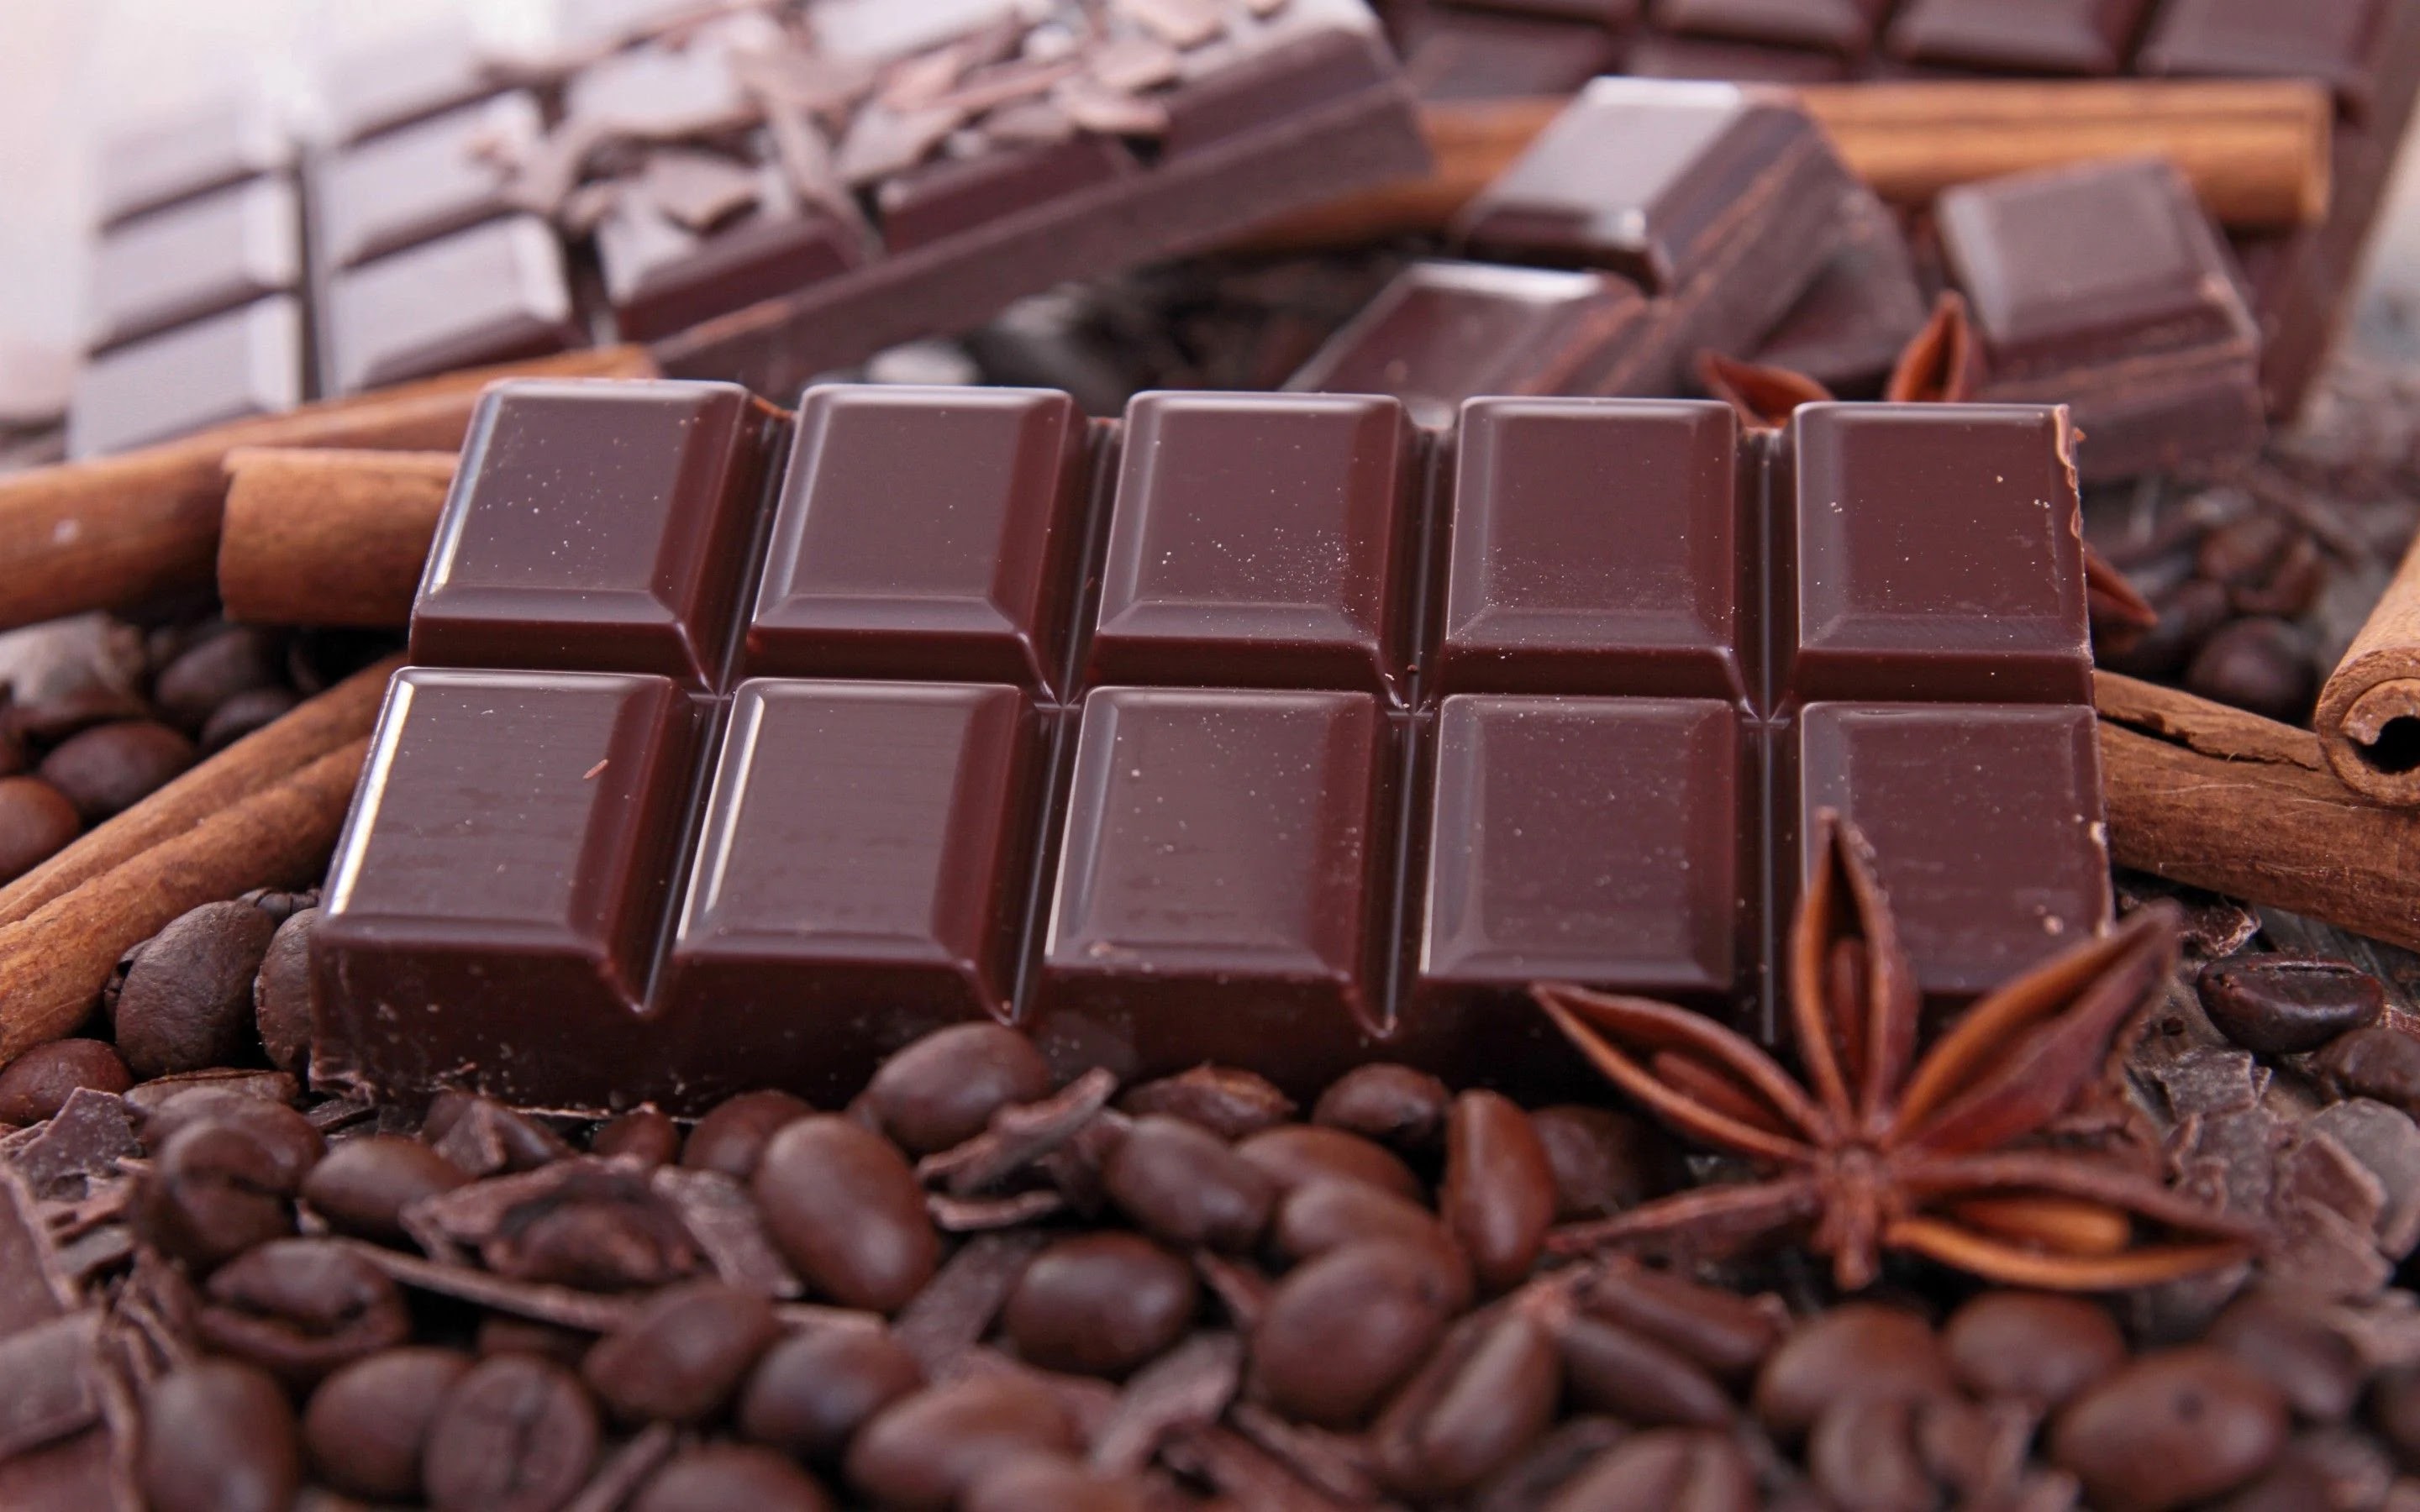 Enjoy a FREE chocolate from Fawaz Travel for World Chocolate Day!